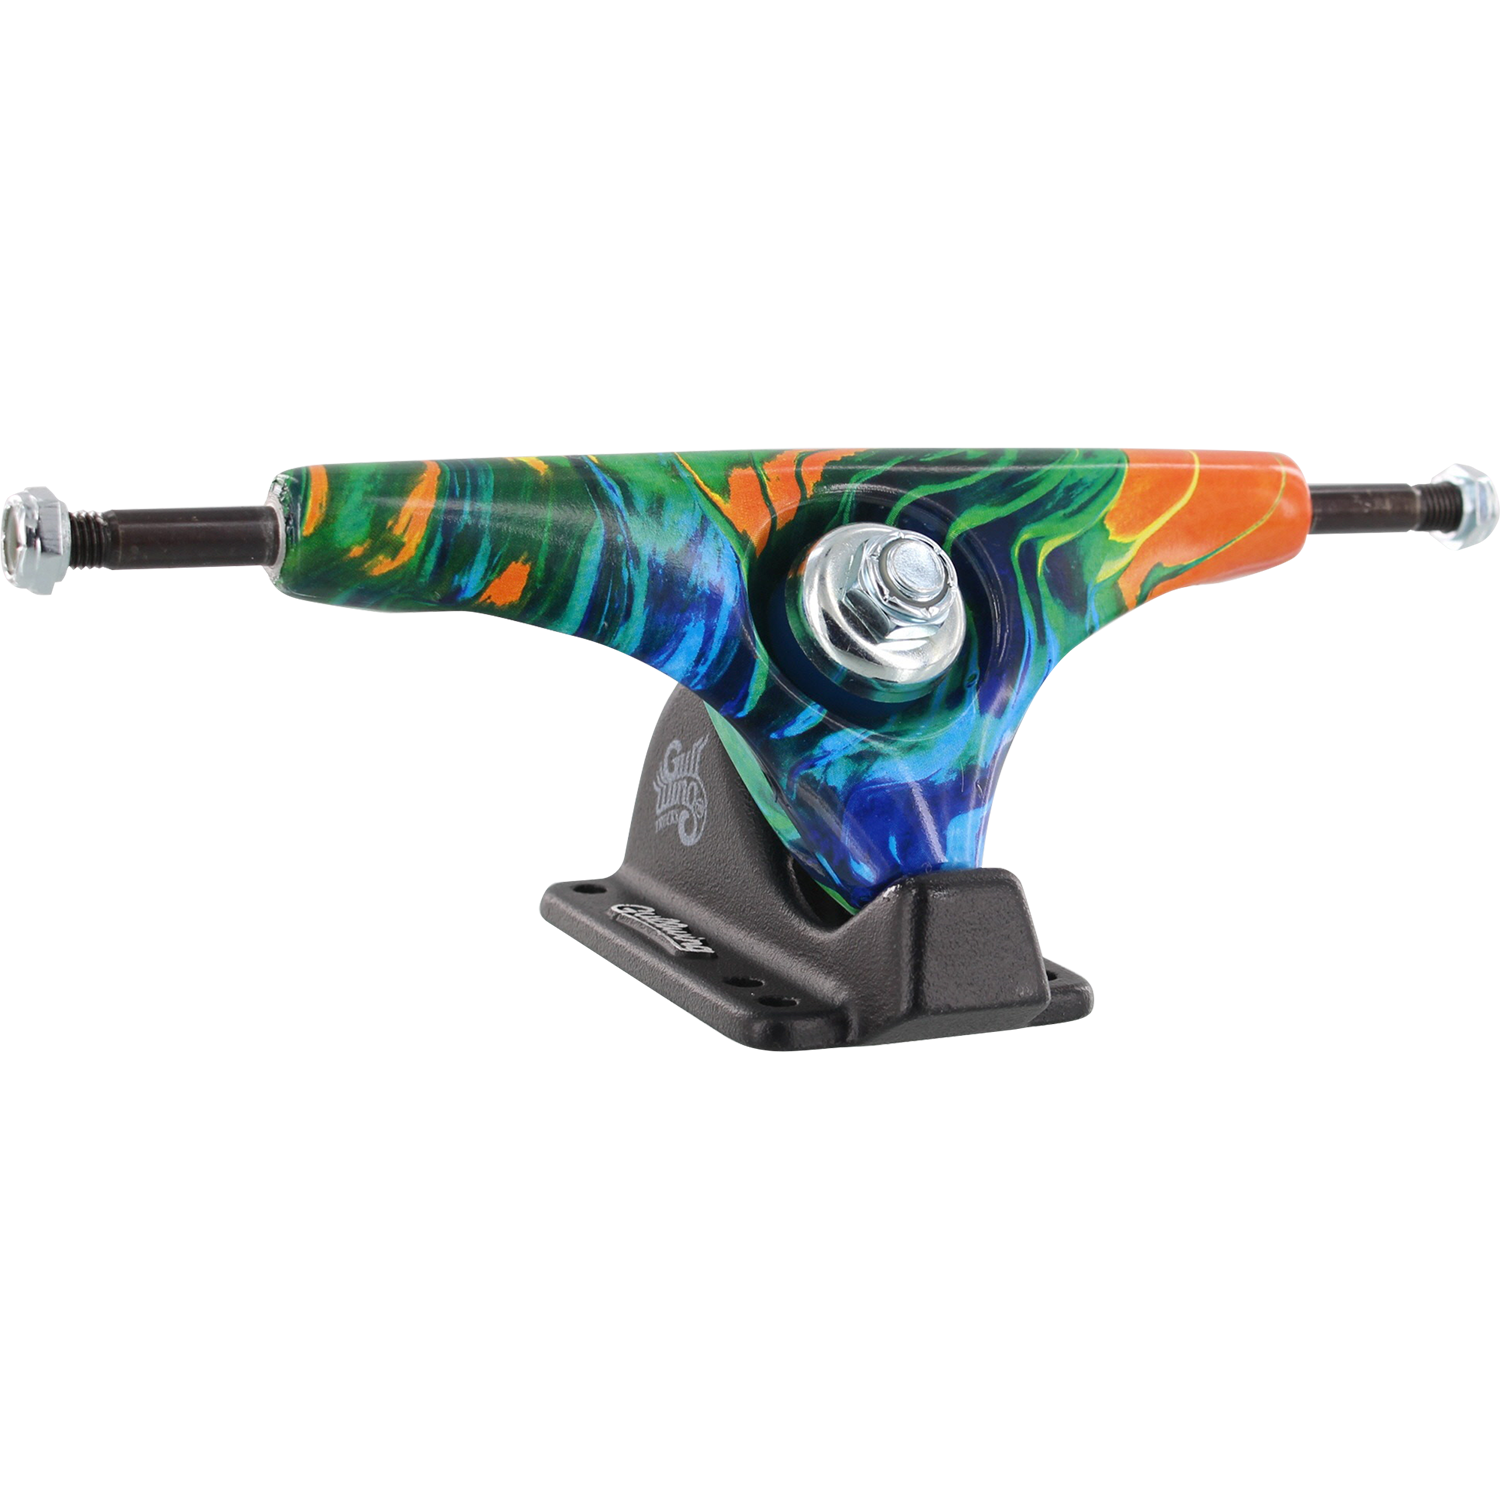 Gullwing Charger 9.0 Resin Longboard Trucks (Set of 2)